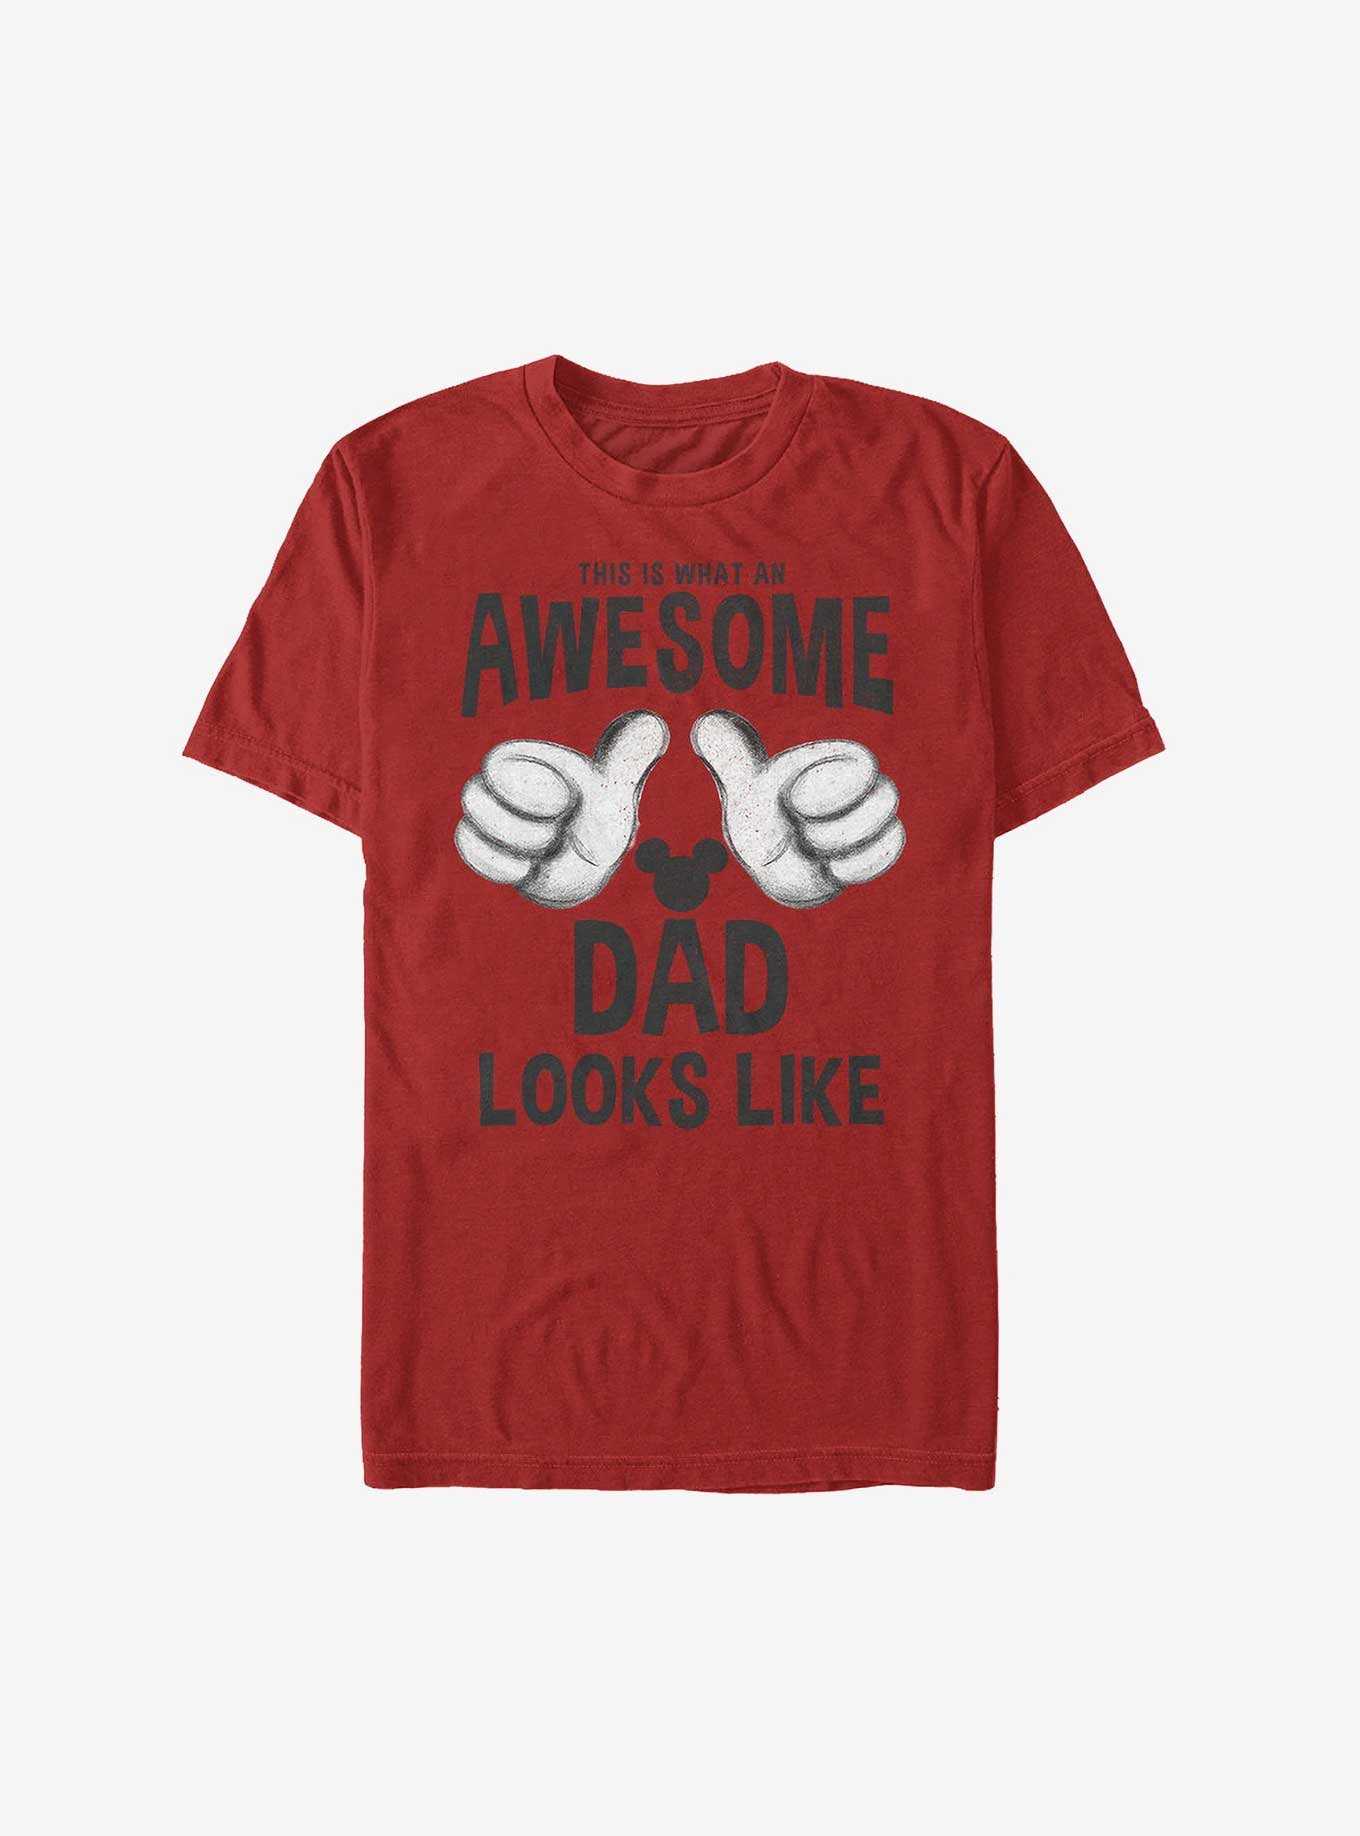 Disney Mickey Mouse Cool Dad T-Shirt, , hi-res